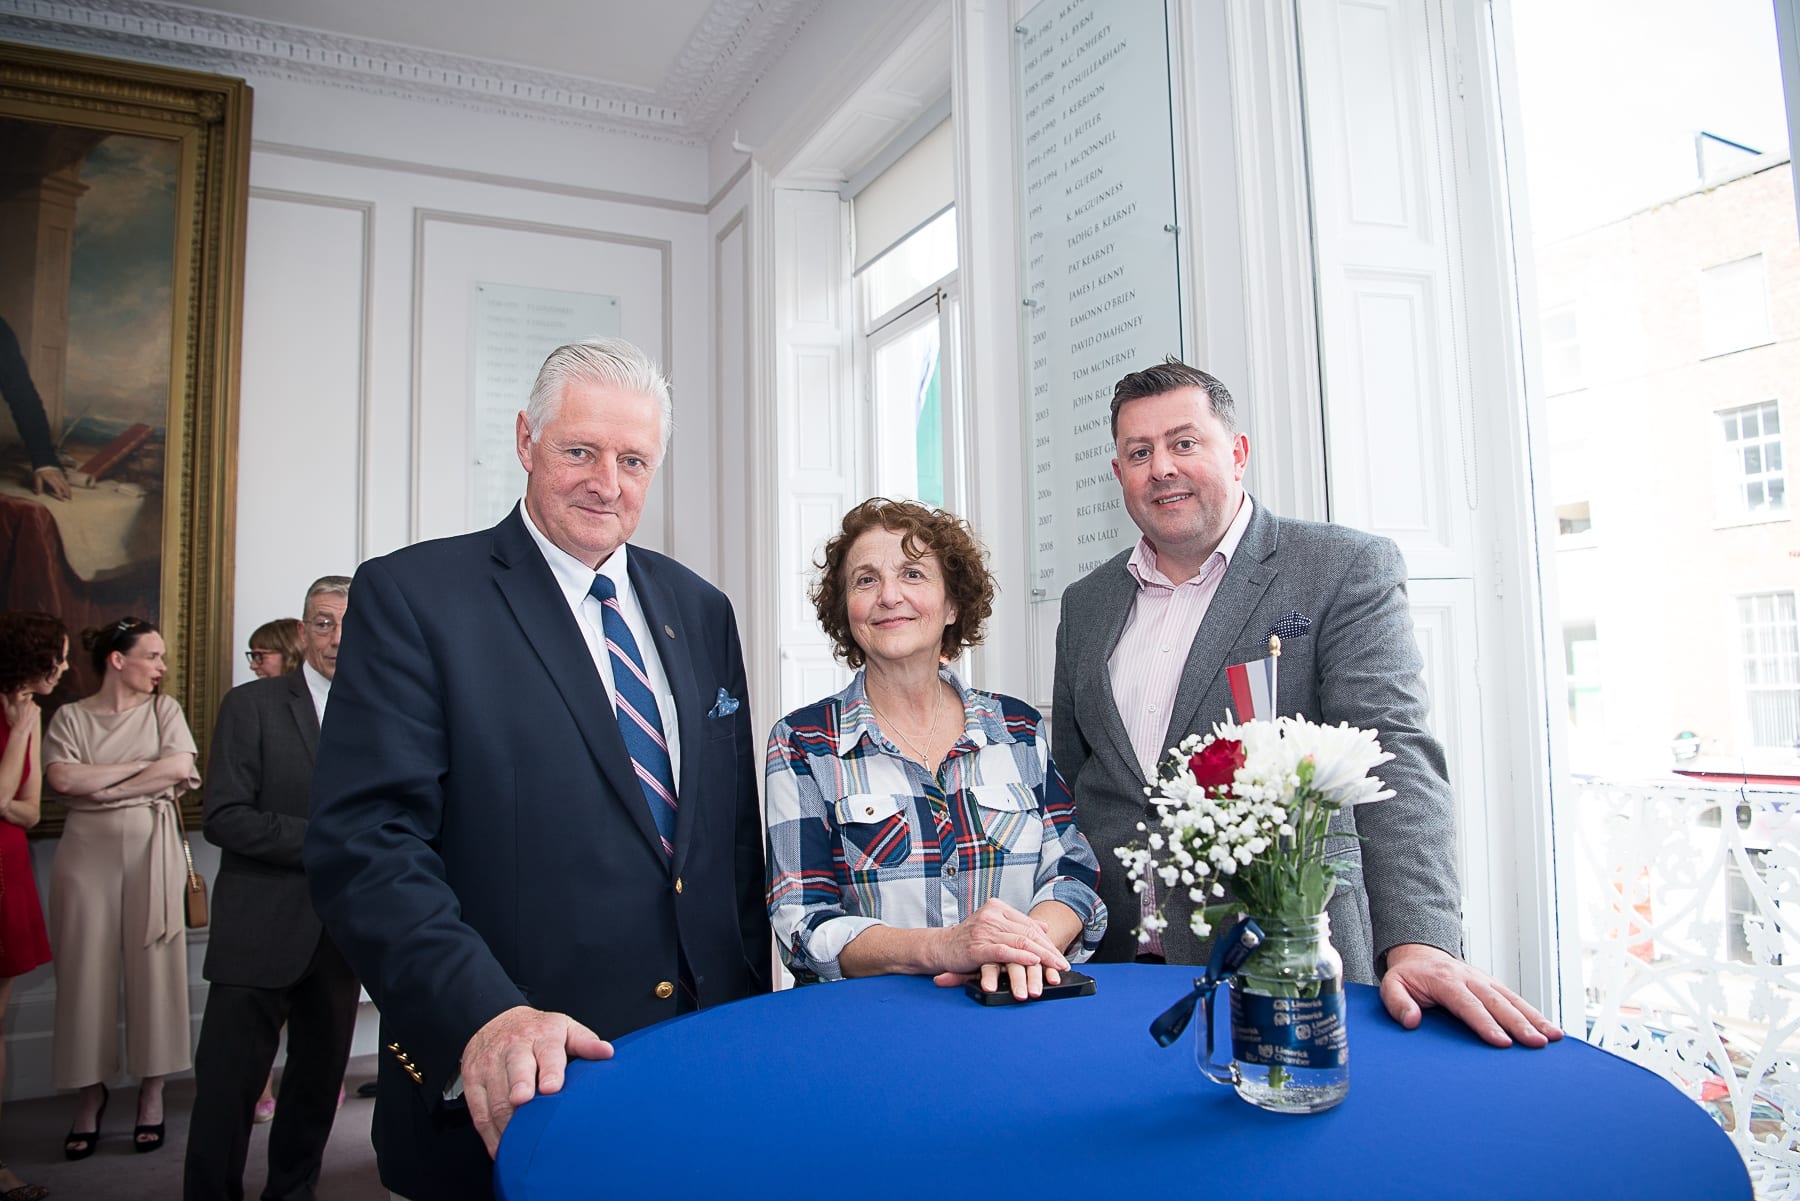 From Left to Right:  French Embassy Event which took place on the 18th June in the Limerick Chamber Boardroom:  Patrick O’Sullivan - Consulate of the Republic of Poland, Marie Thérése Batardiére - UL, Patrick O’Sullivan - Sales Dynamics. 
Photo by Morning Star Photography